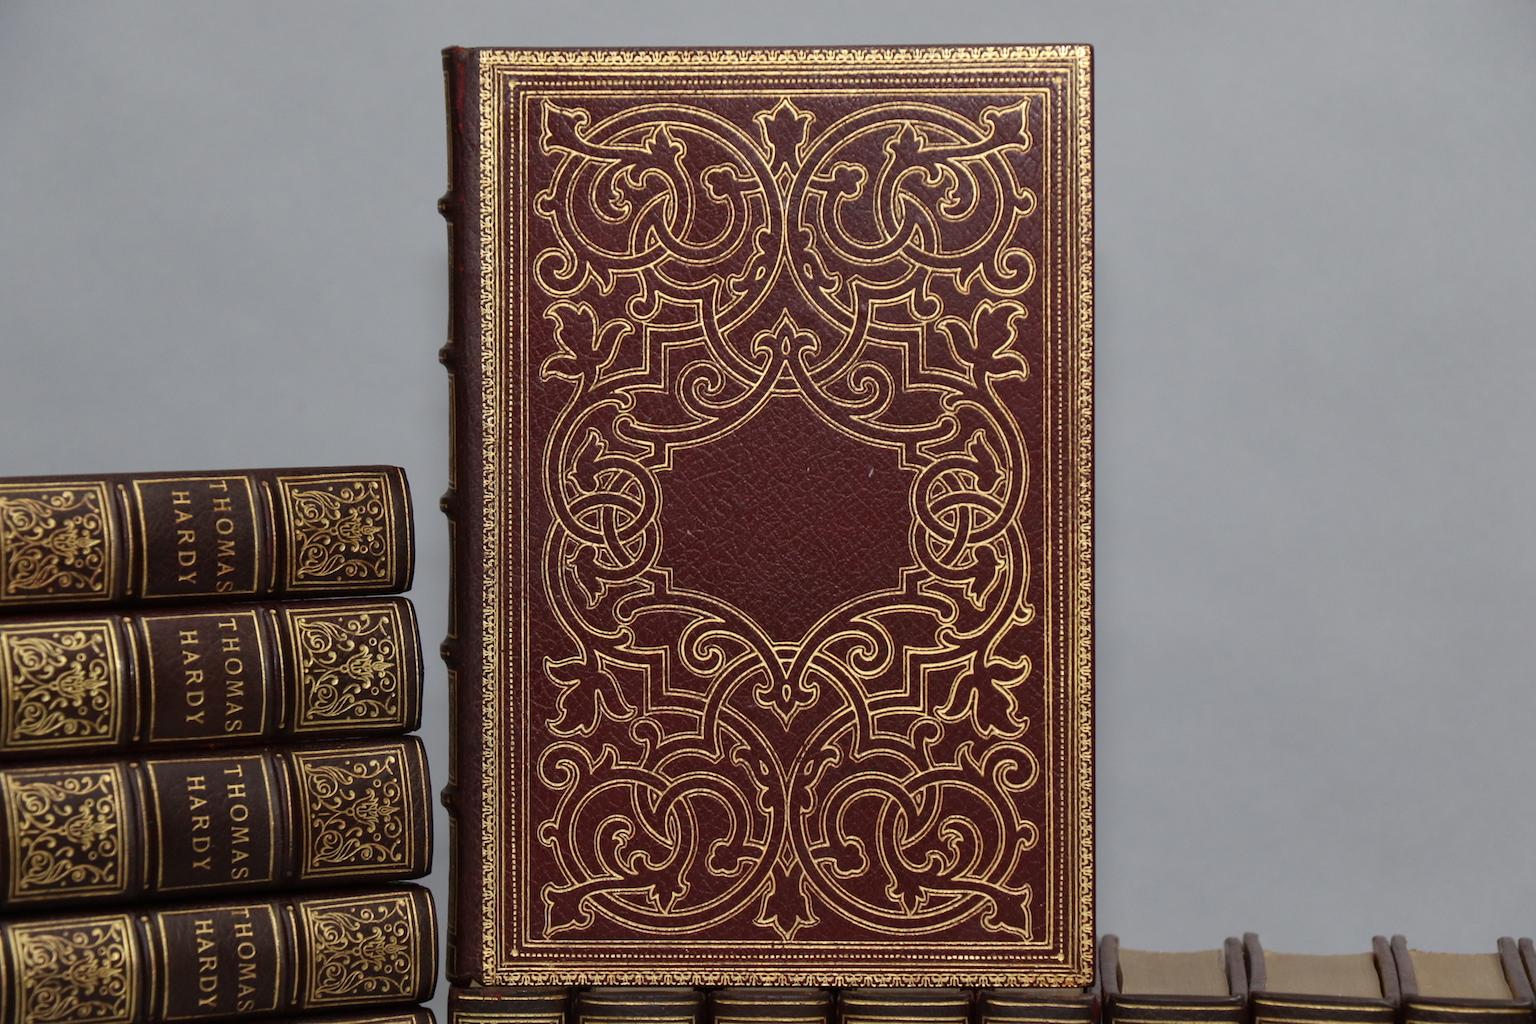 Mellstock edition. Leatherbound. Thirty-seven volumes. Quarto.
Limited to 500 sets, signed by Thomas Hardy of volume one of frontispiece. Exquisitely bound in full red morocco with top edges gilt, raised bands, and elaborate floral gilt tooling on